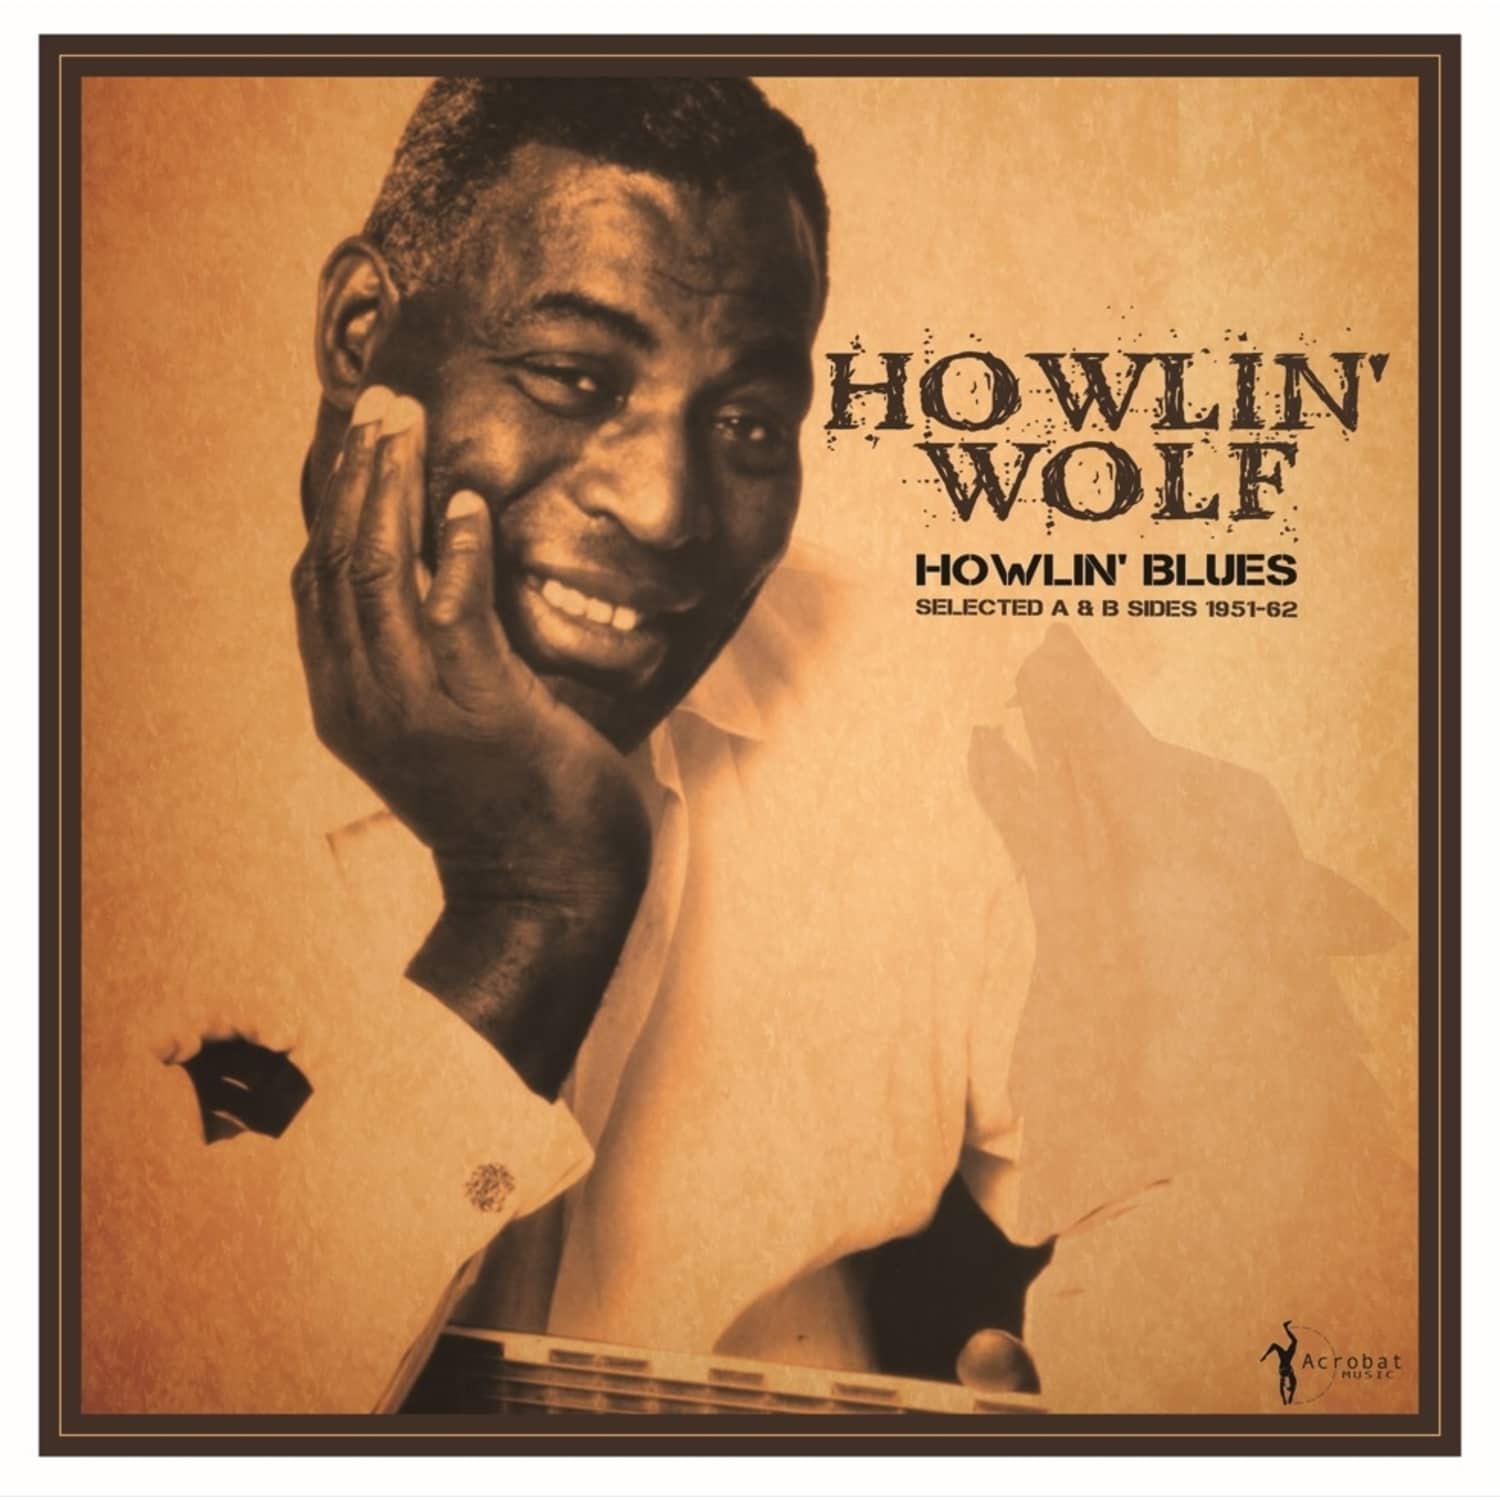 Howlin Wolf - HOWLIN BLUES SELECTED A & B SIDES 1951-62 